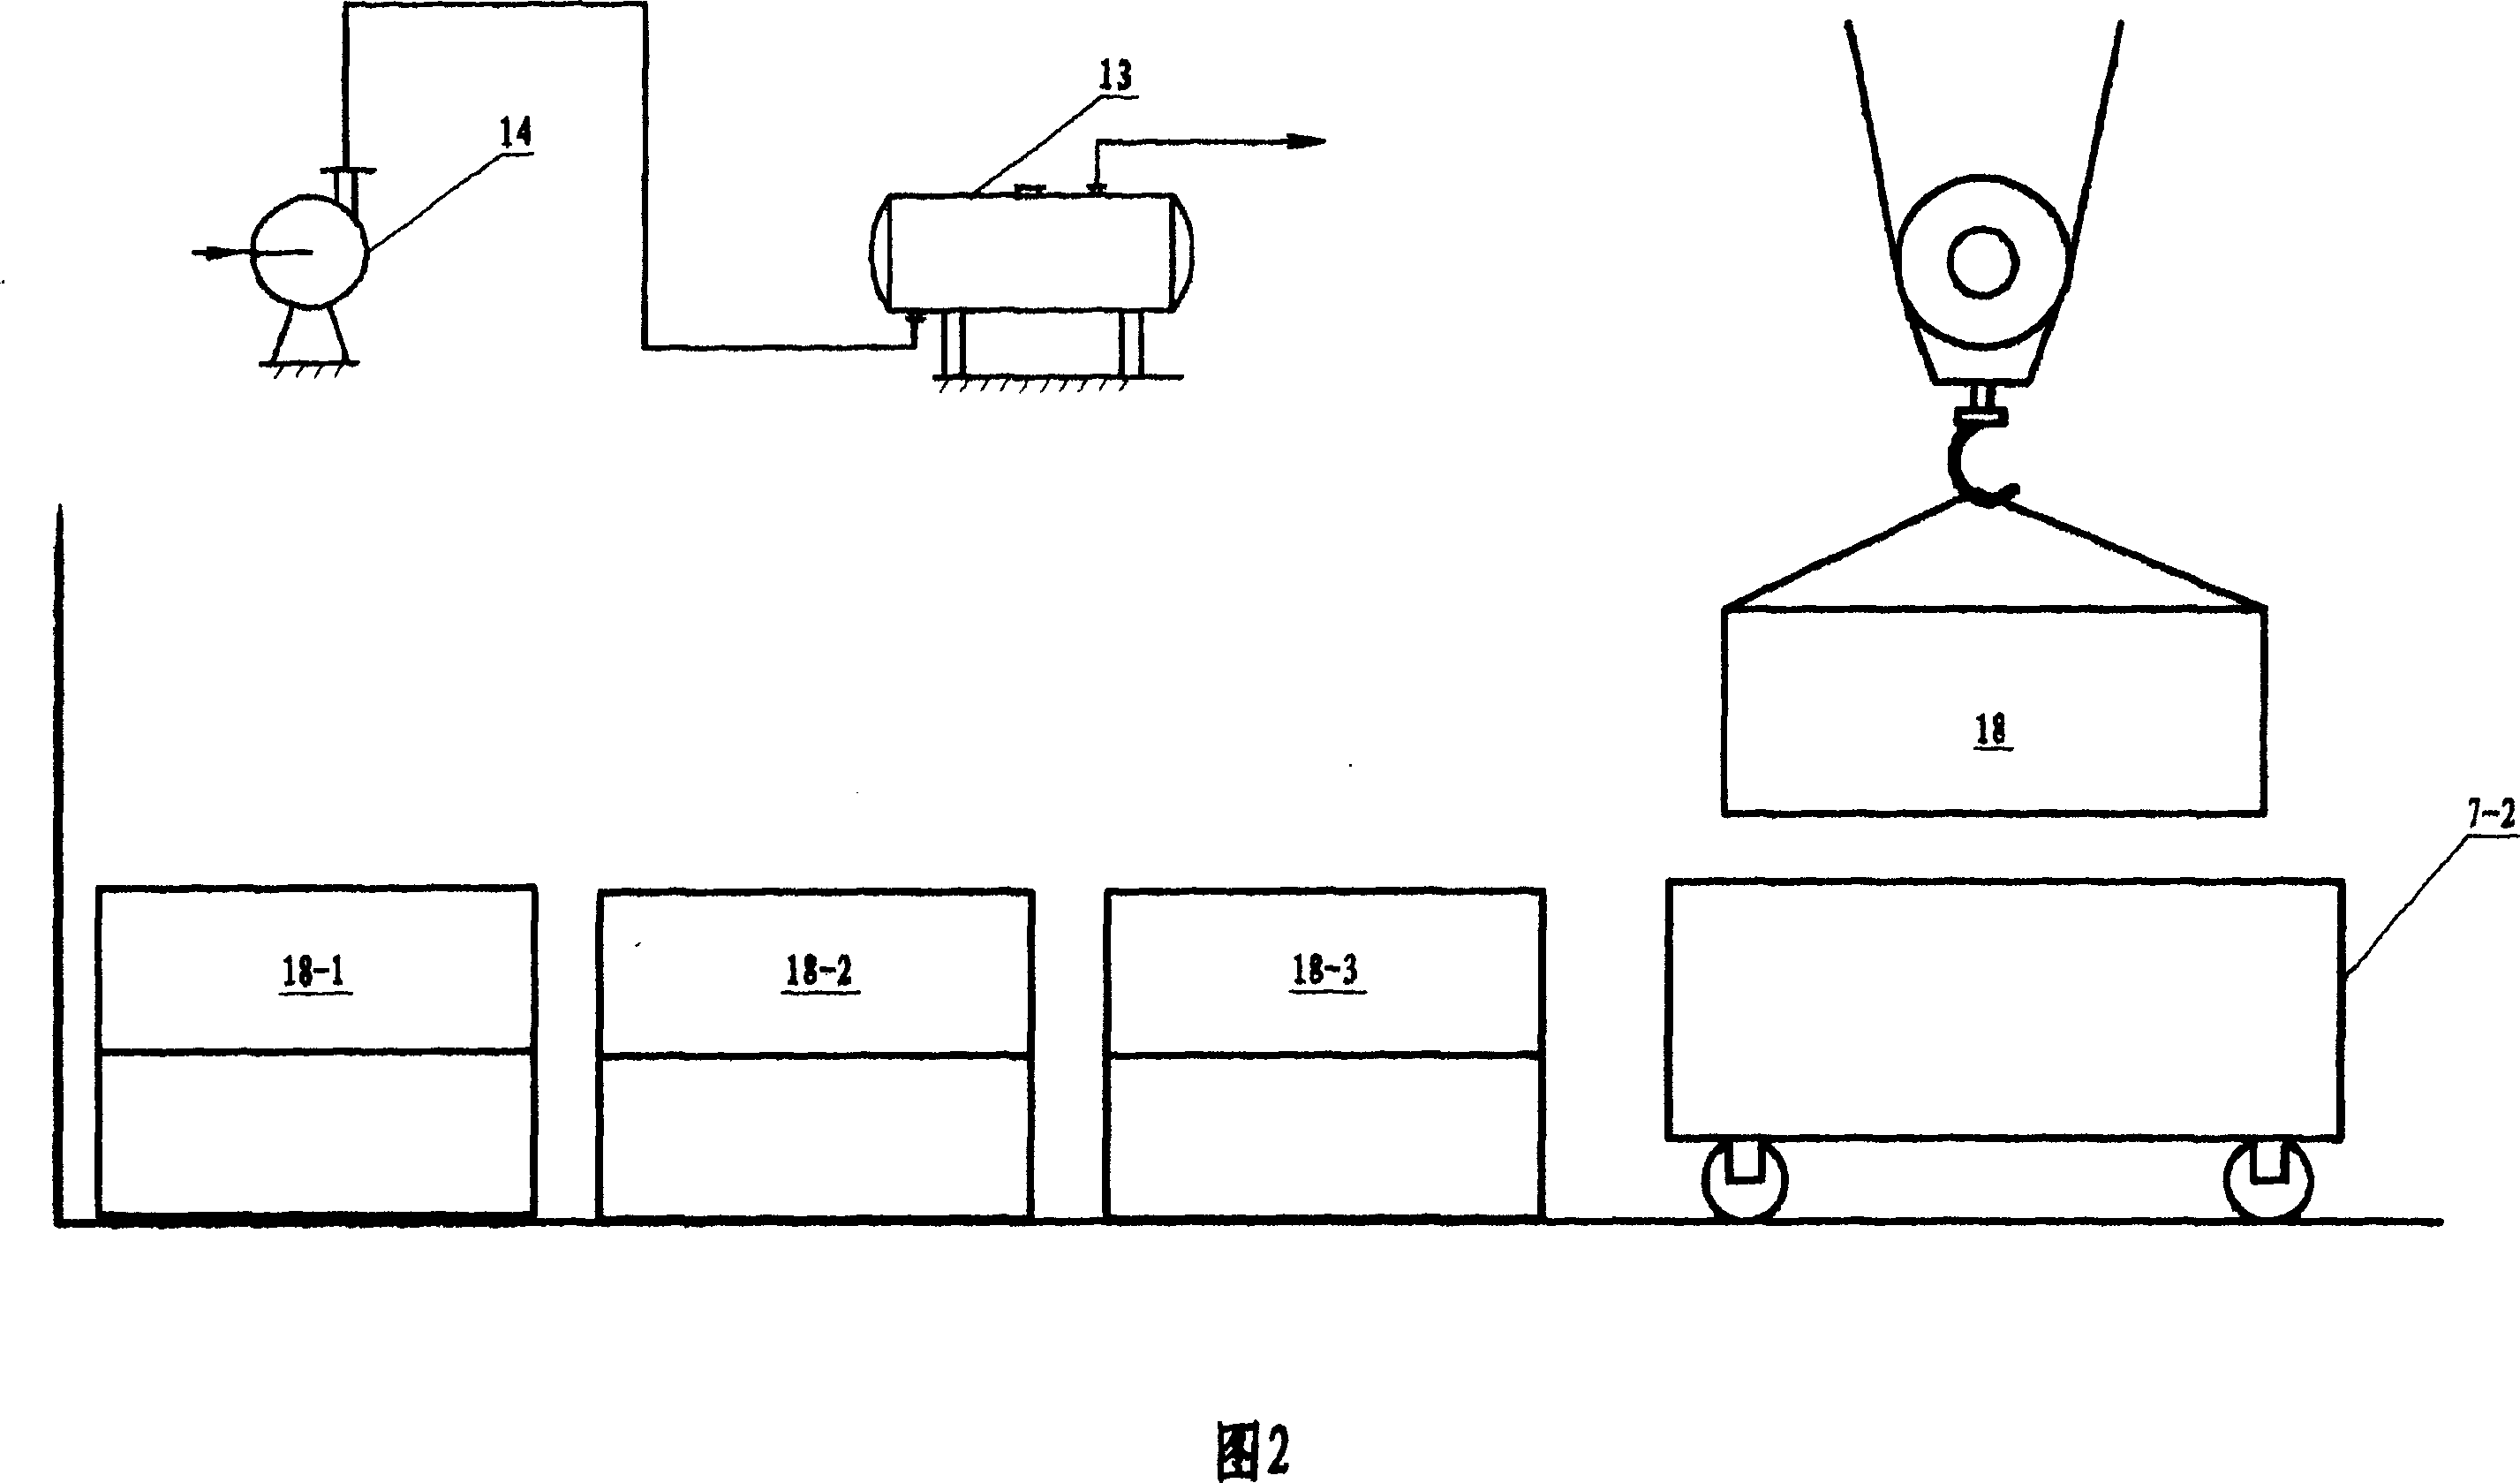 Process and device for producting artificial stone